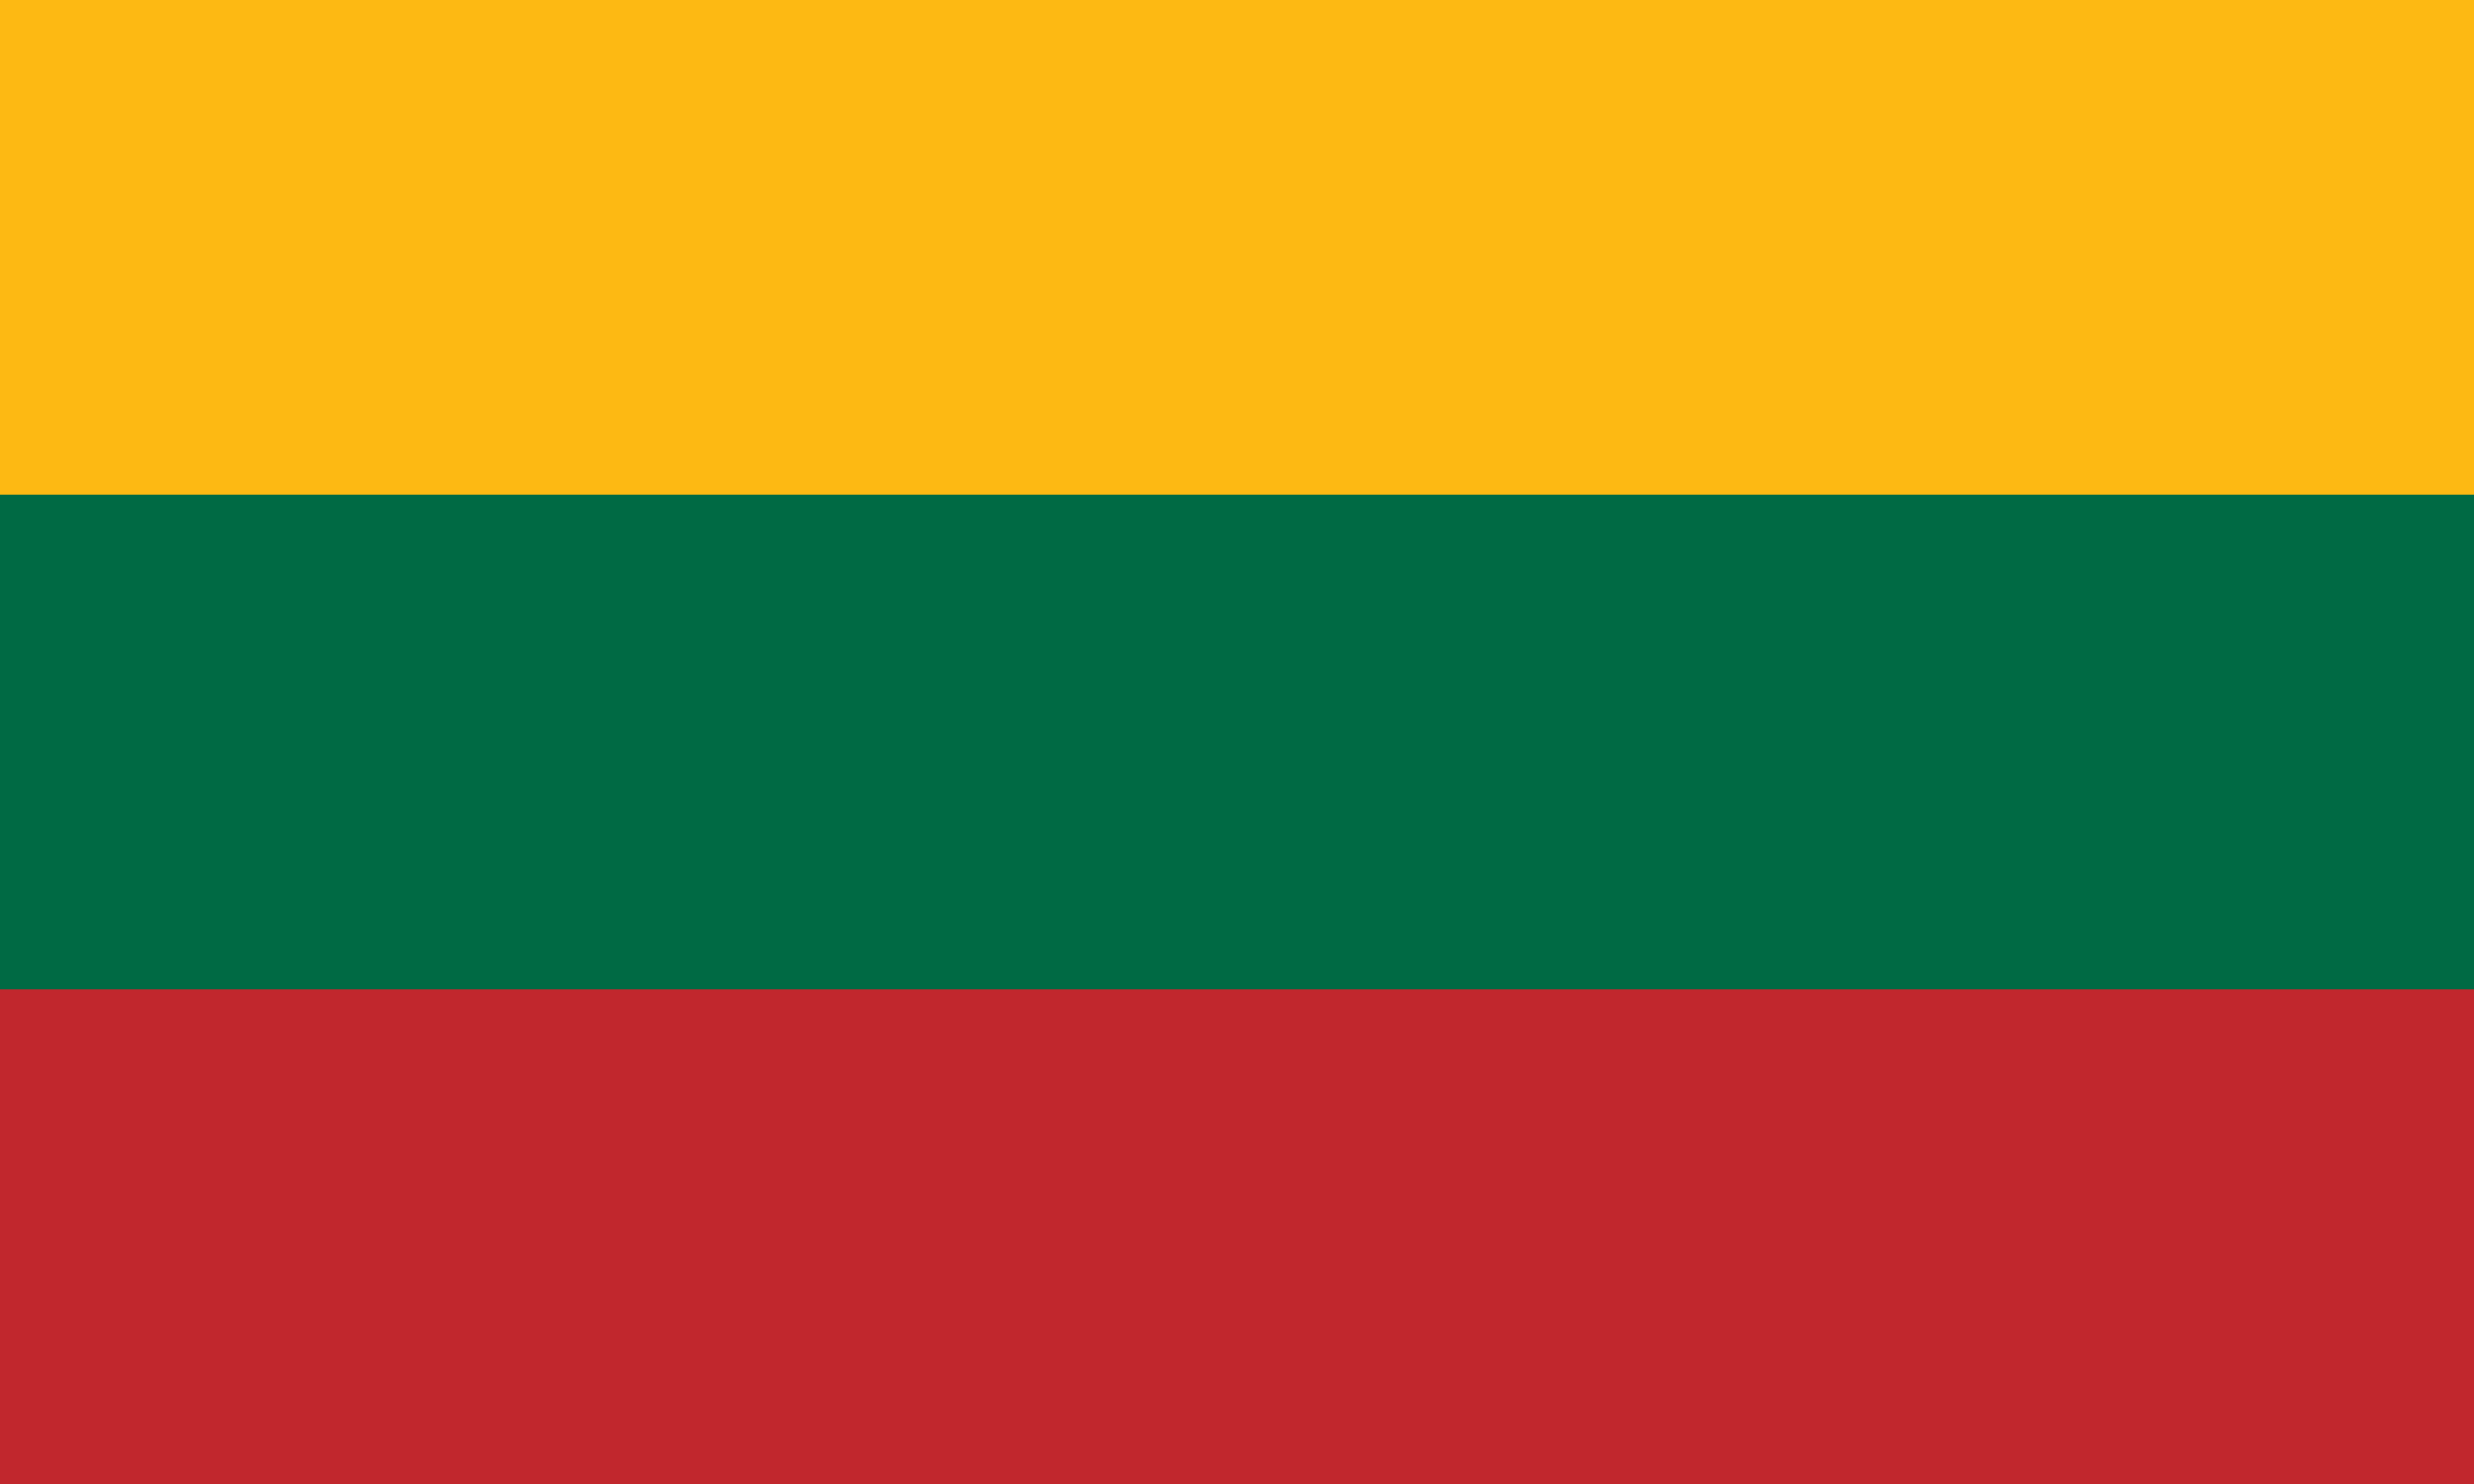 Facts about Lithuania